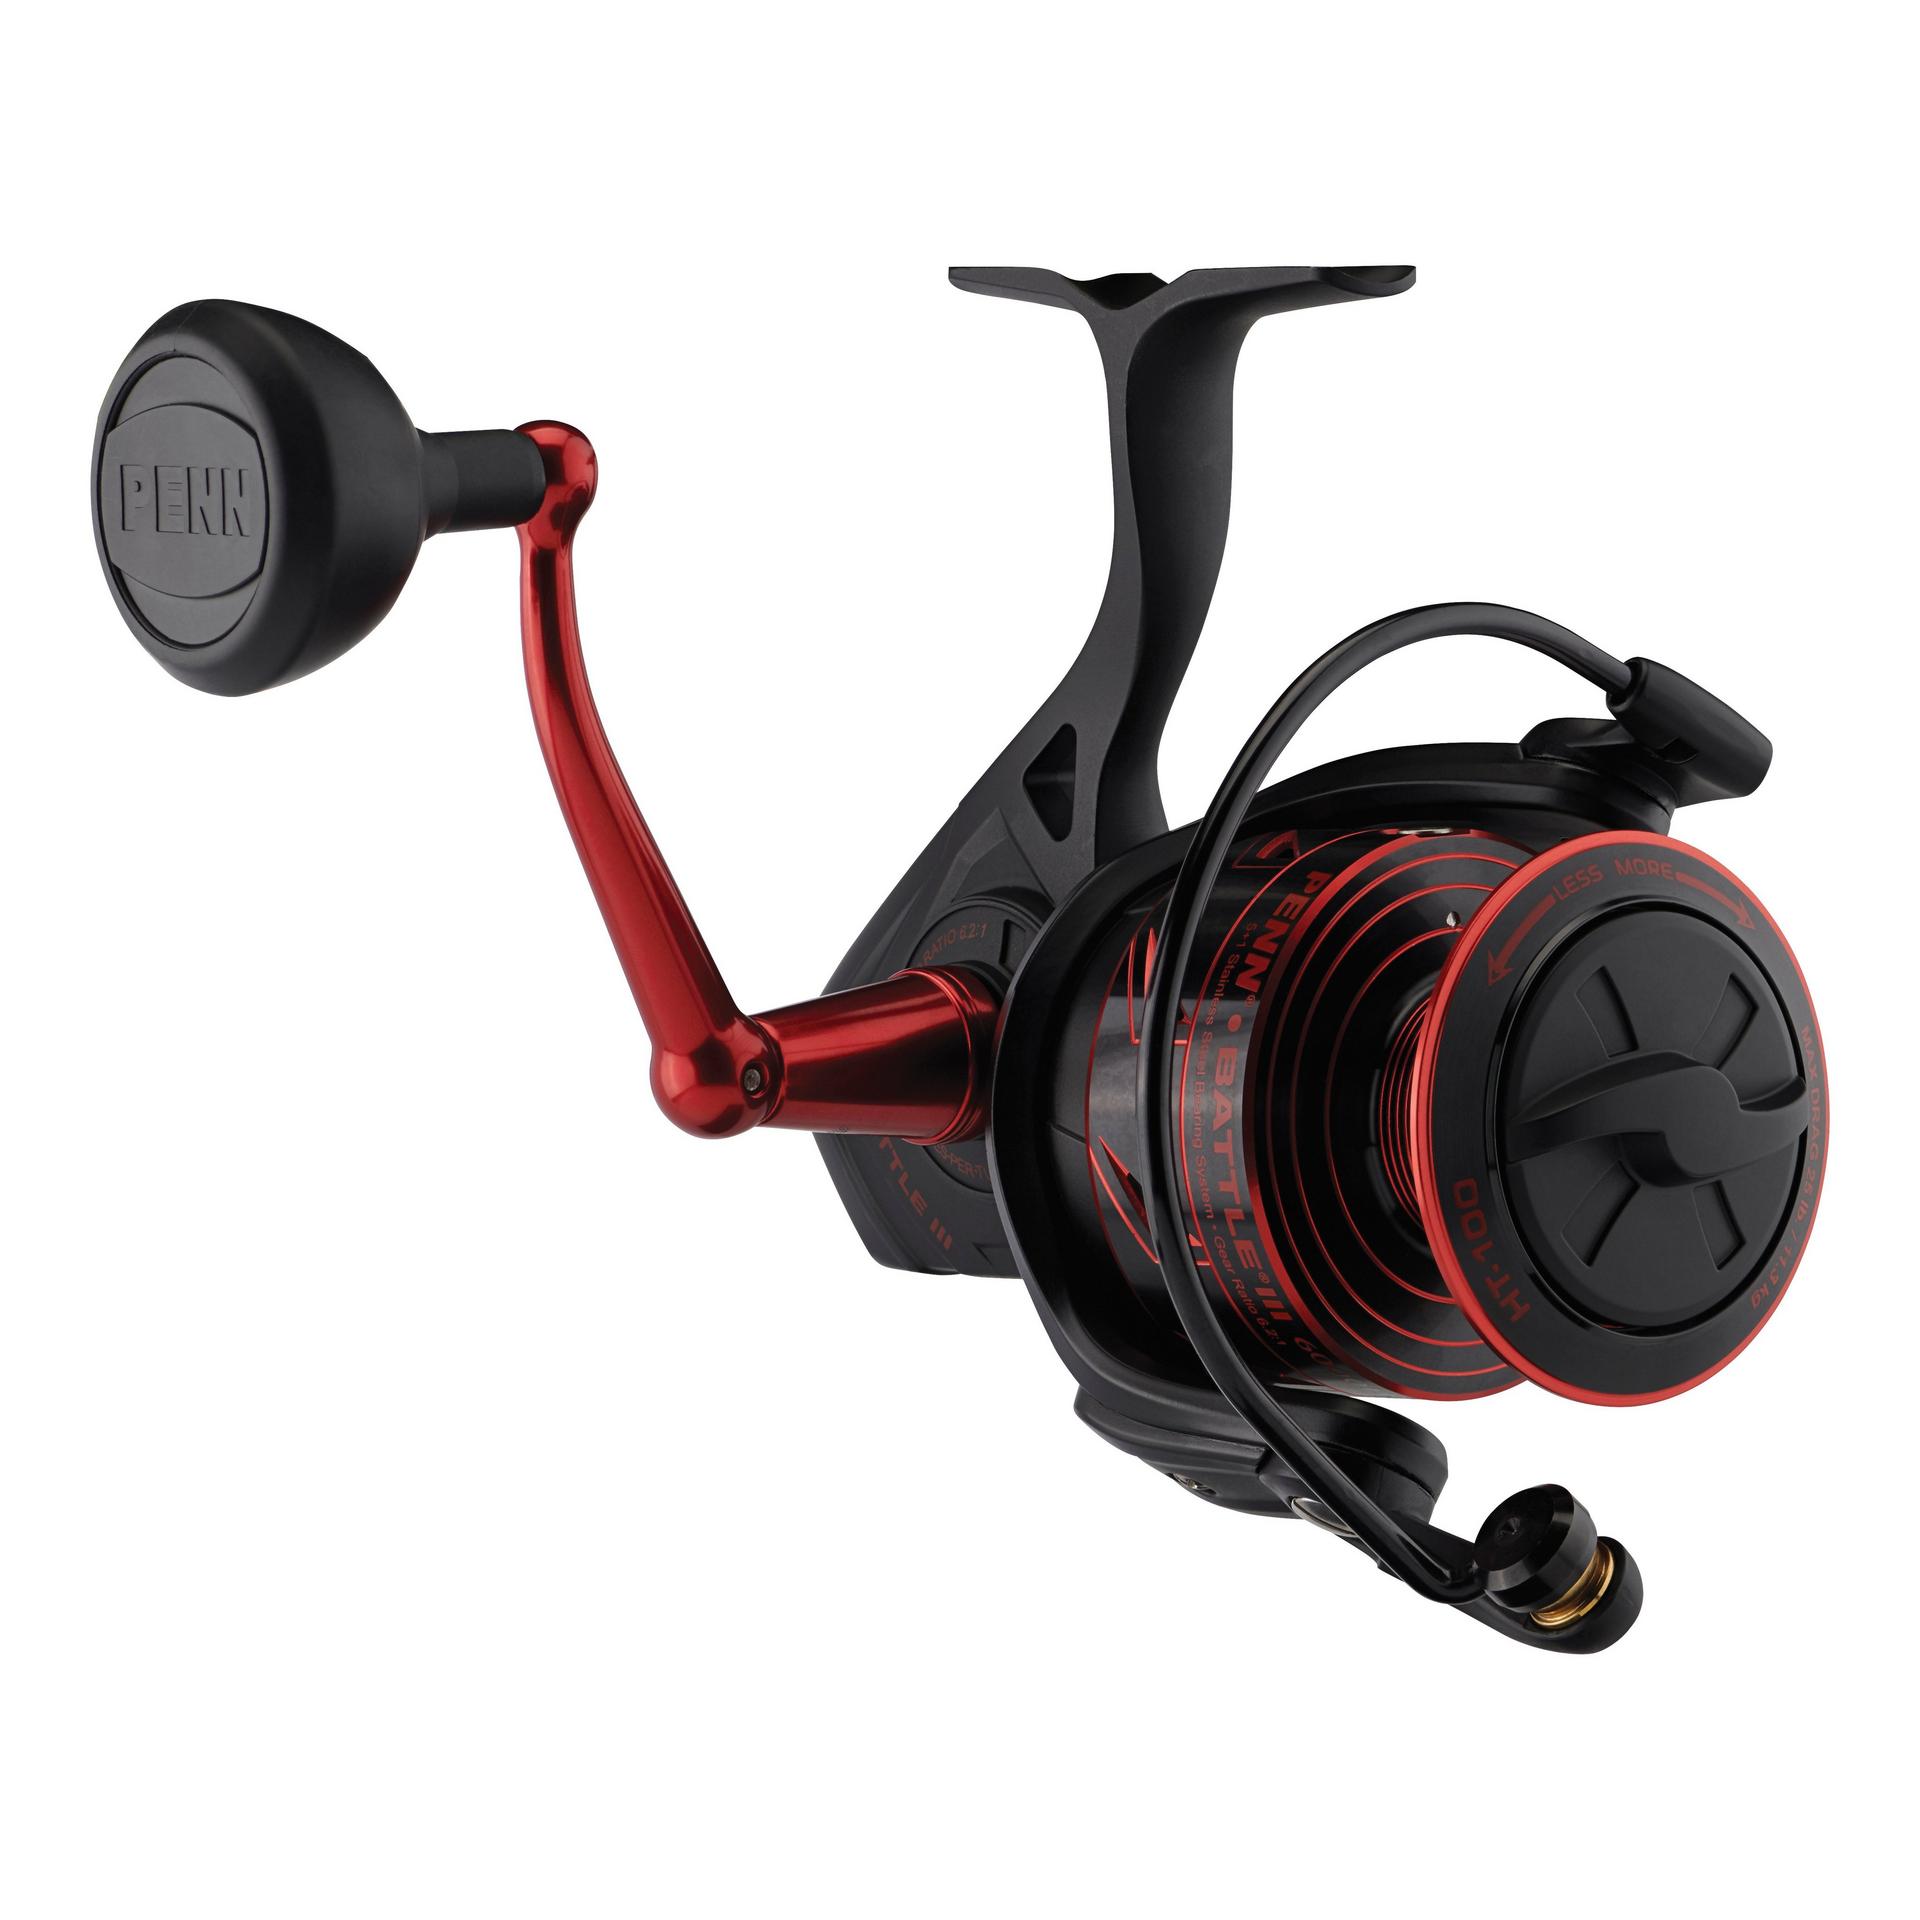 Penn BATTLE III Spinning Reel First Impressions and Unboxing 